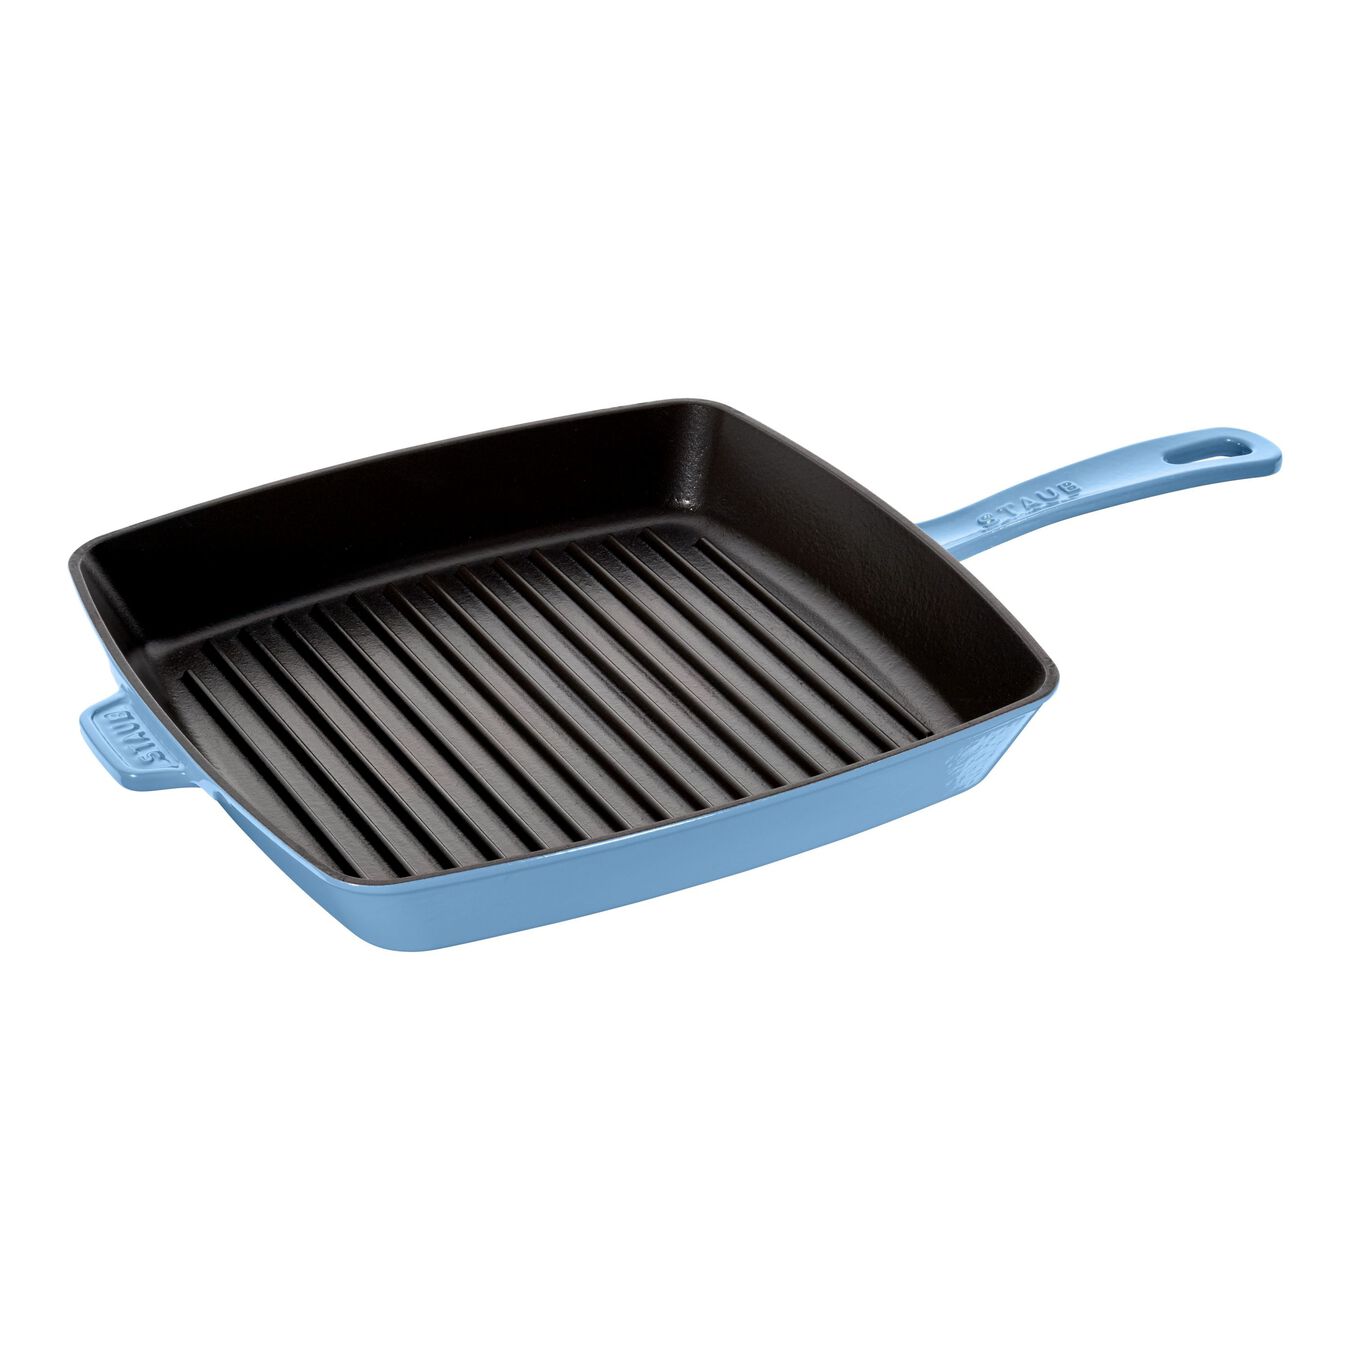 30 cm cast iron square American grill, ice-blue,,large 1